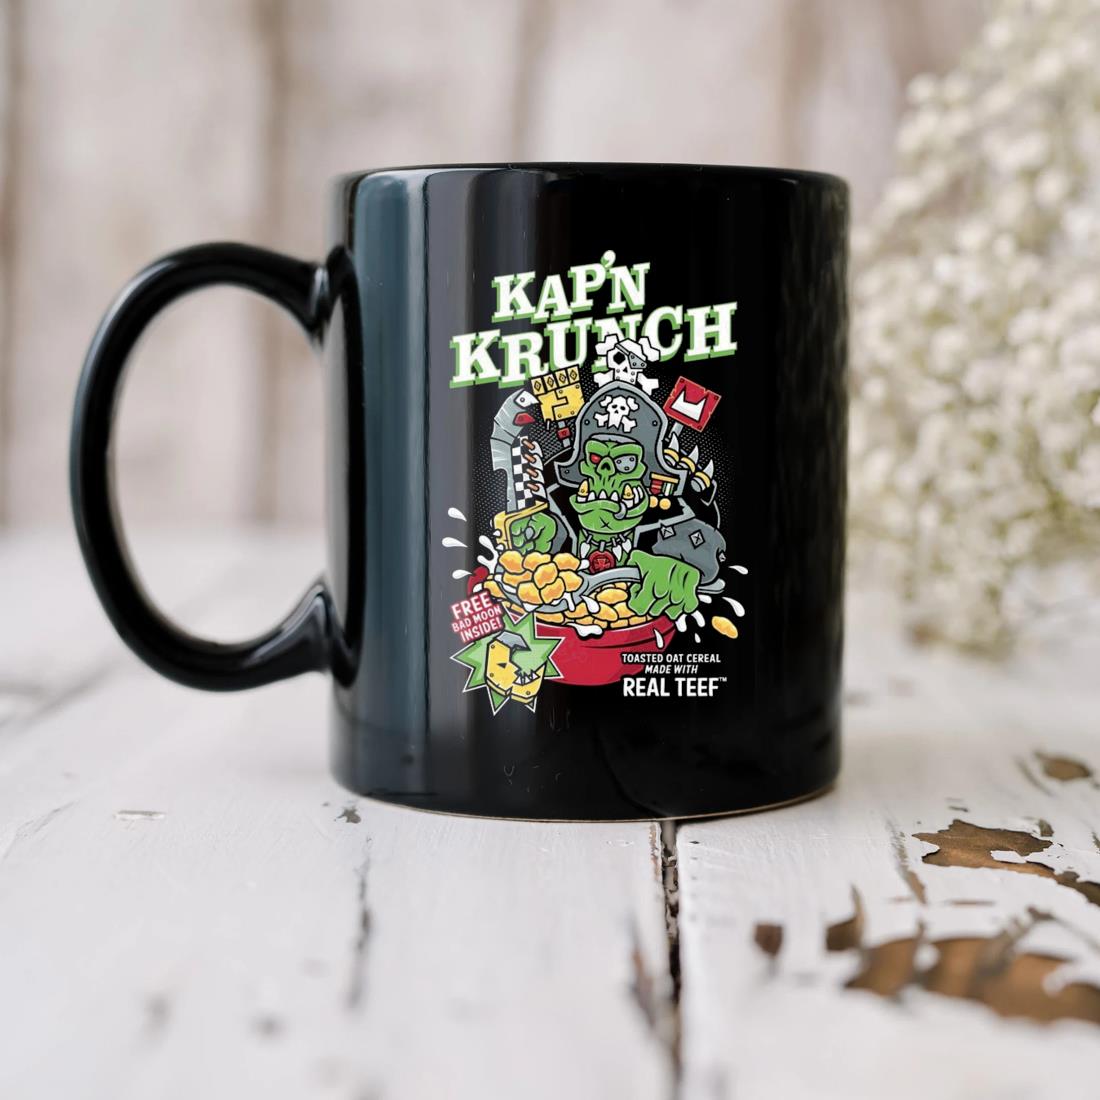 Kap'n Krunch Toasted Oat Cereal Made With Real Teef Mug